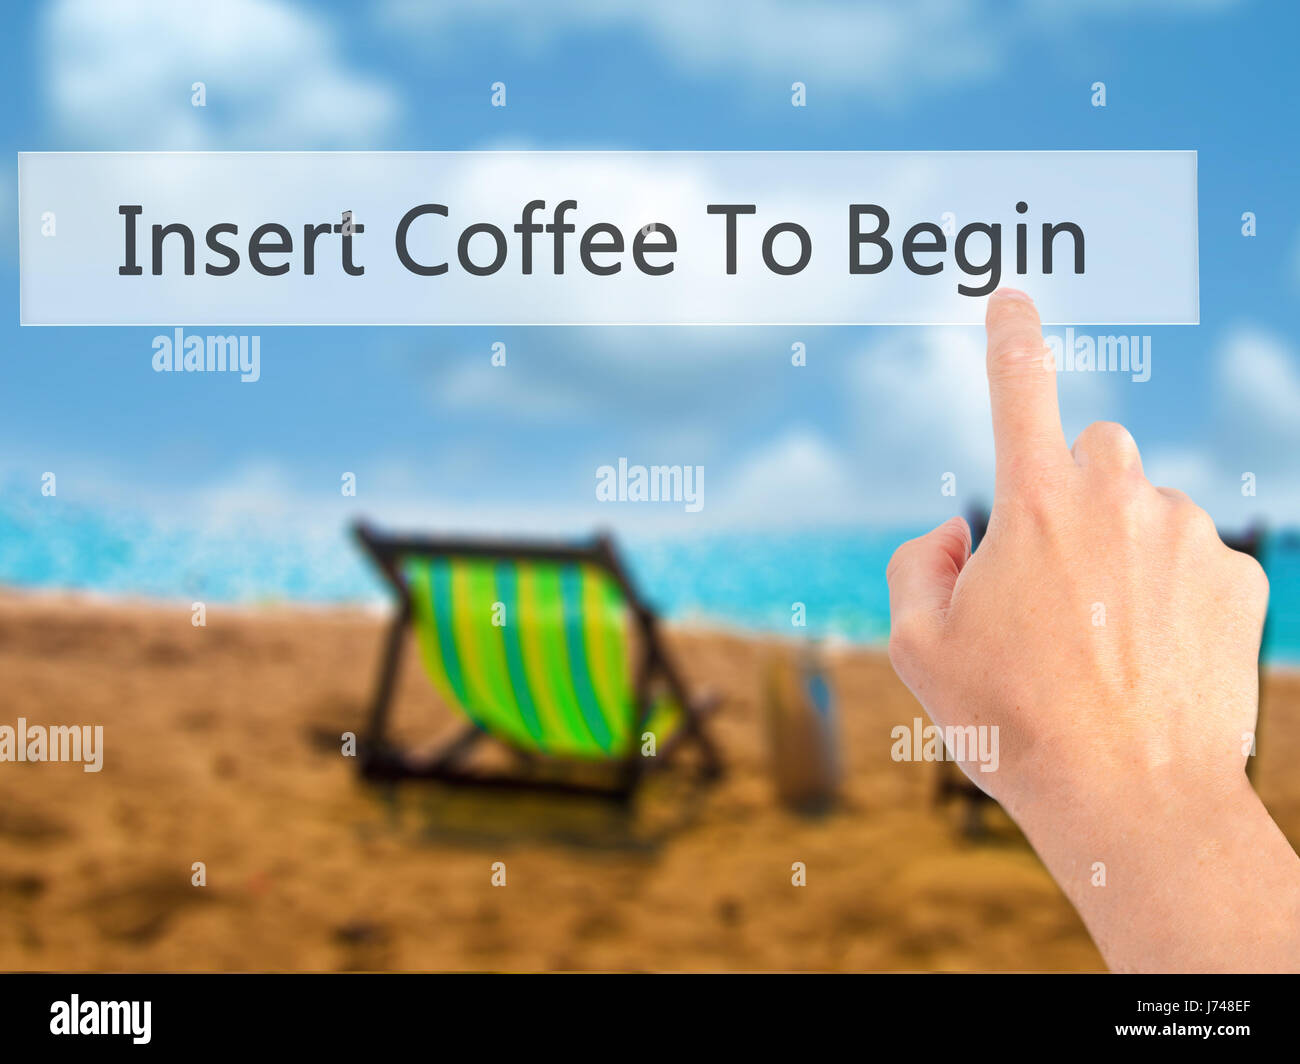 Insert Coffee To Begin - Hand pressing a button on blurred background concept . Business, technology, internet concept. Stock Photo Stock Photo